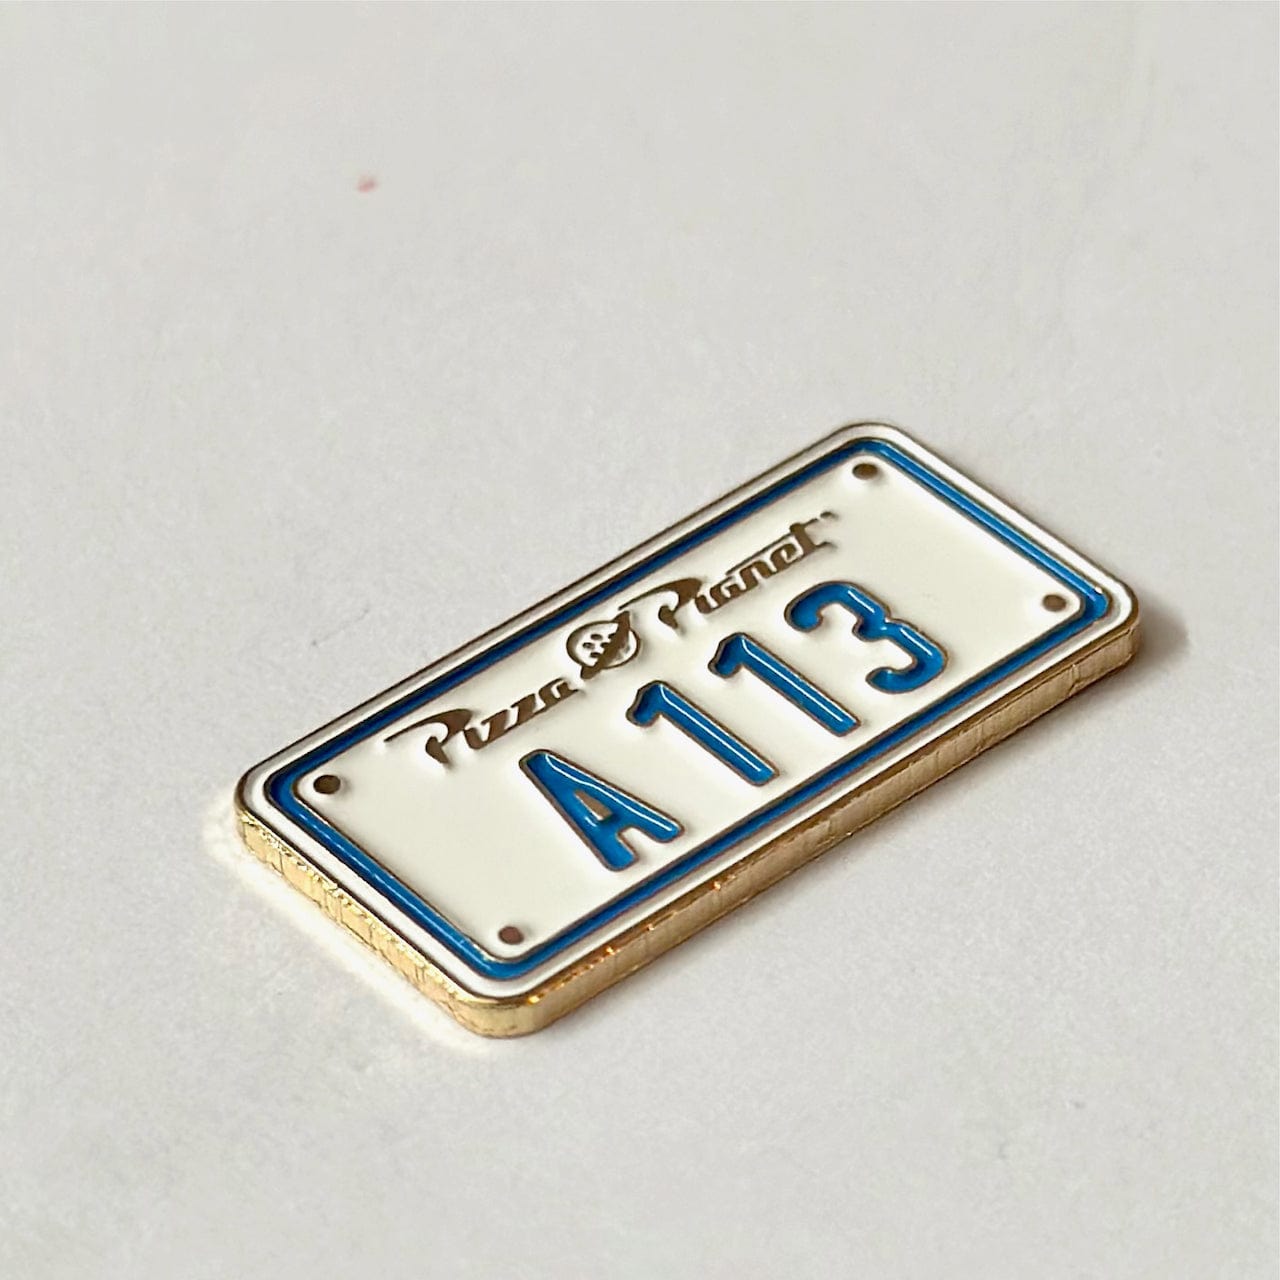 Pinbuds Enamel pin A113 license plate pizza planet easter egg pin